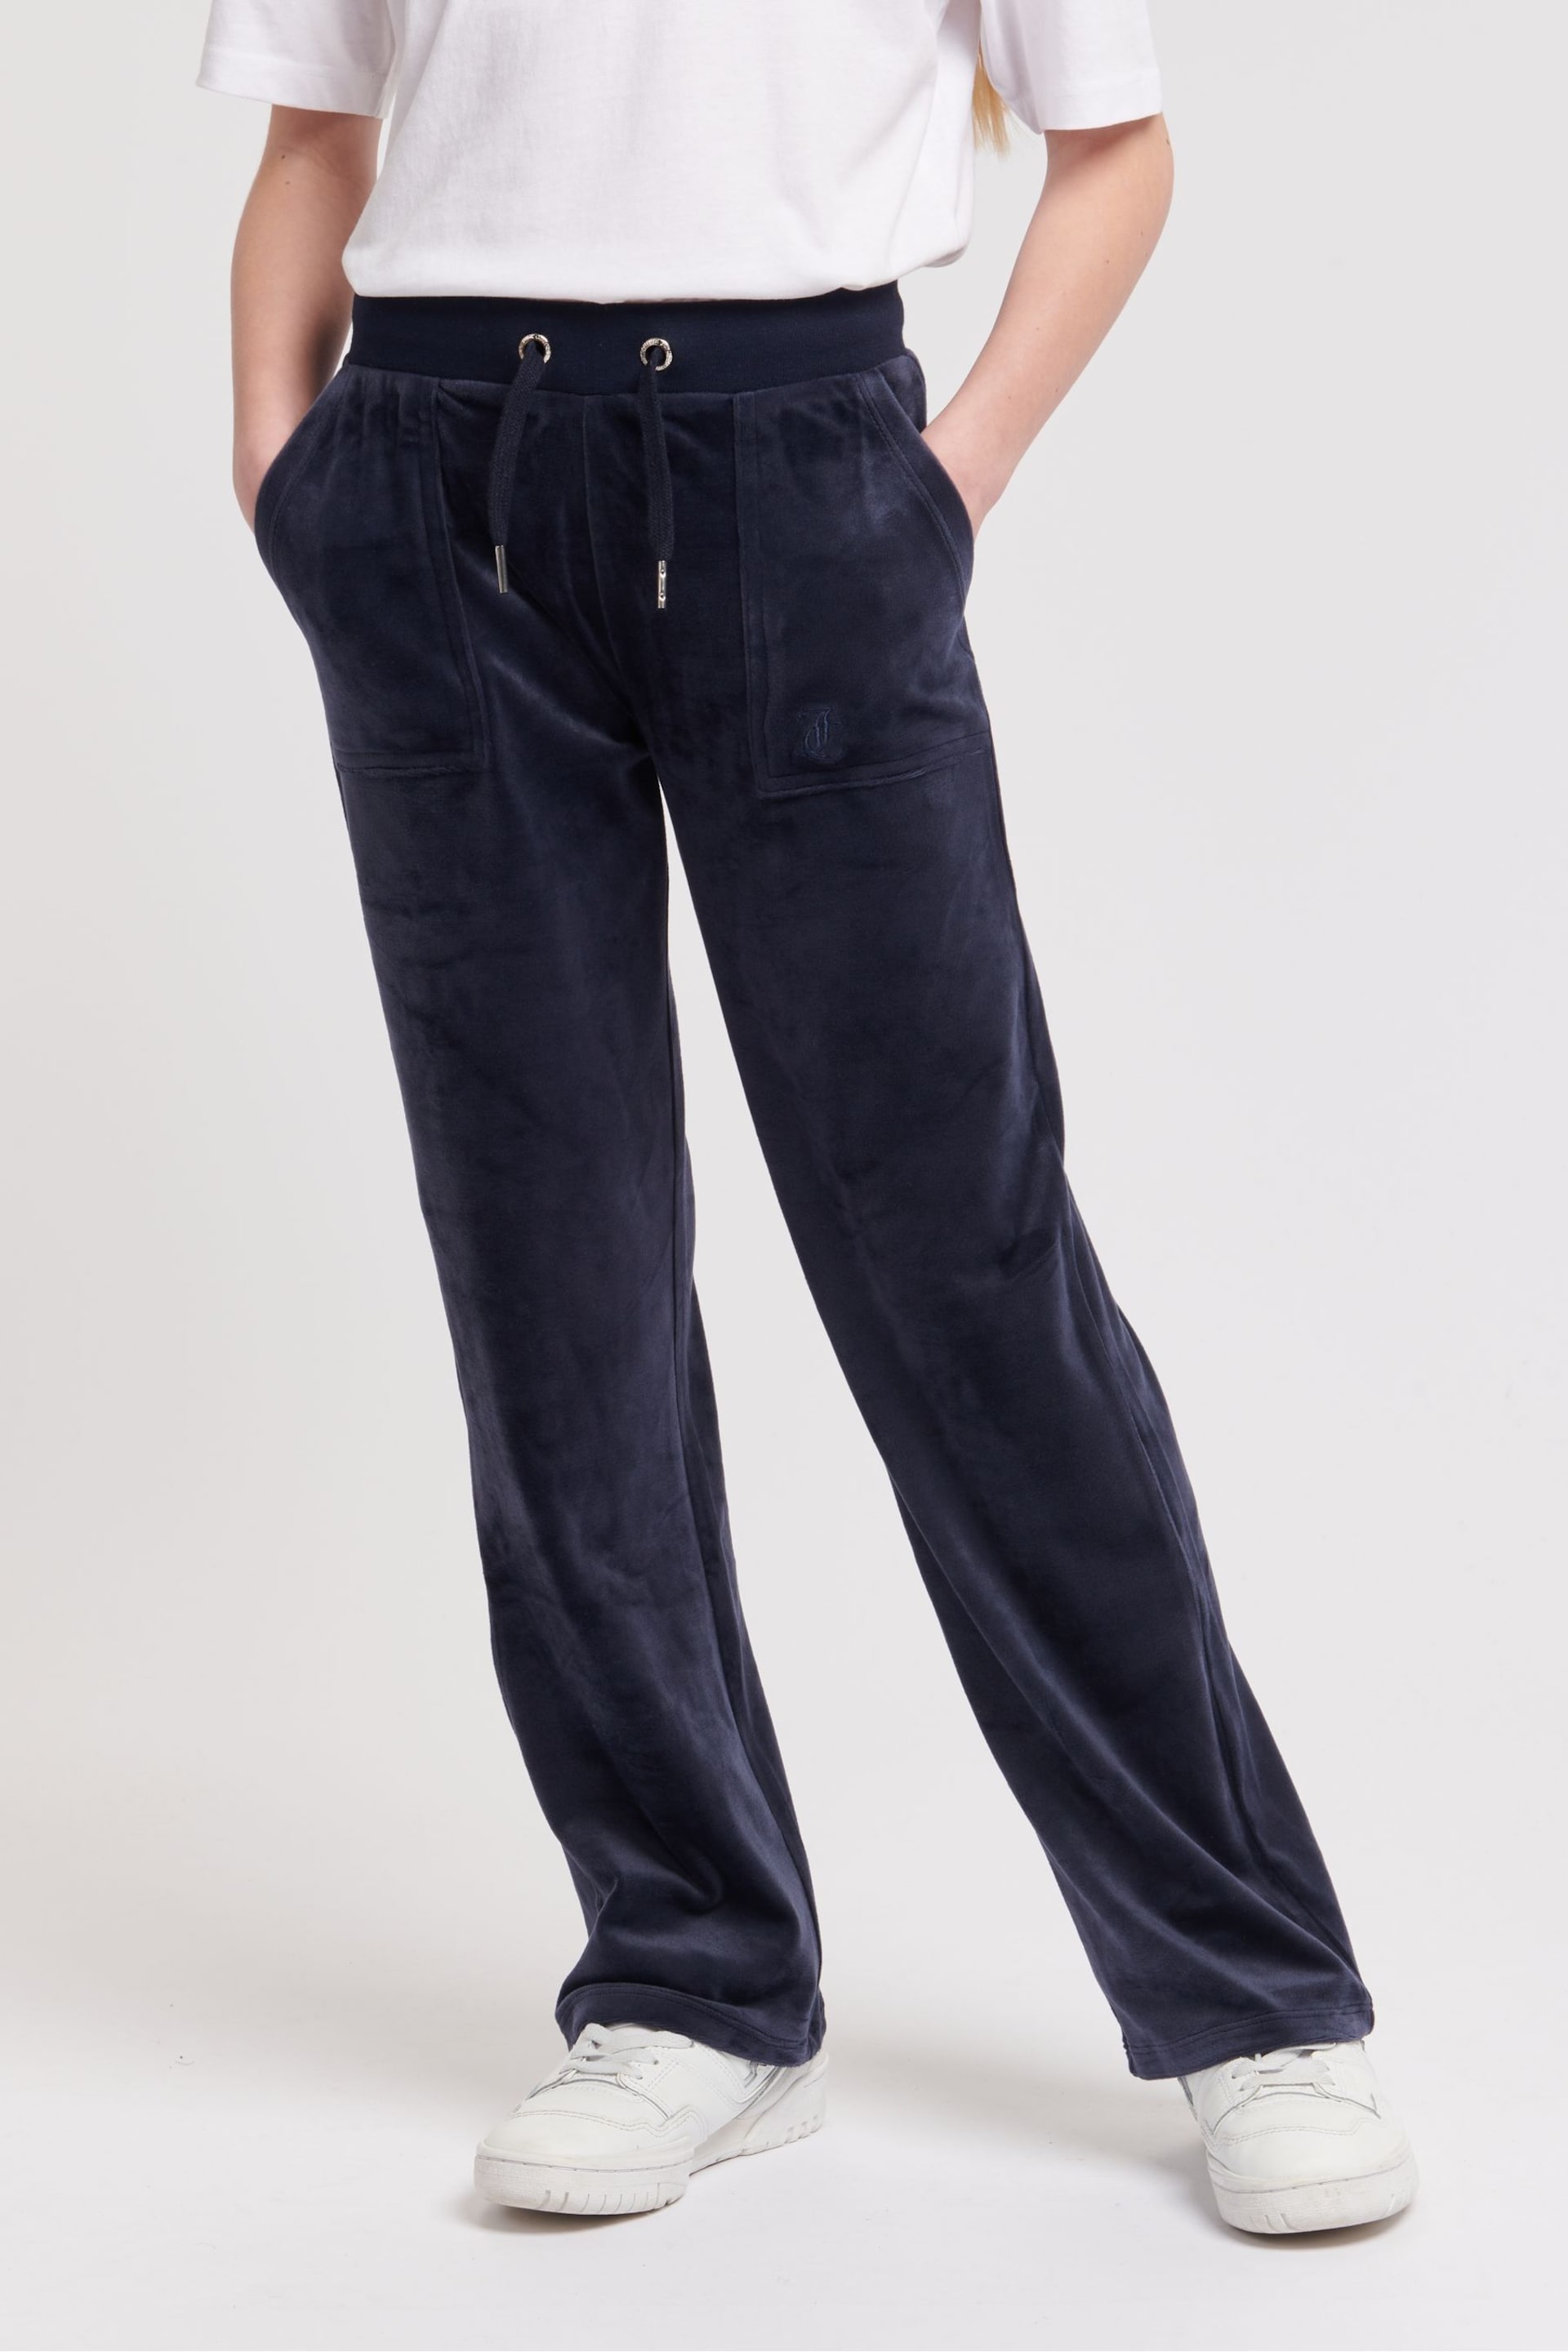 Juicy Couture Tonal Wide Leg Joggers - Image 1 of 7